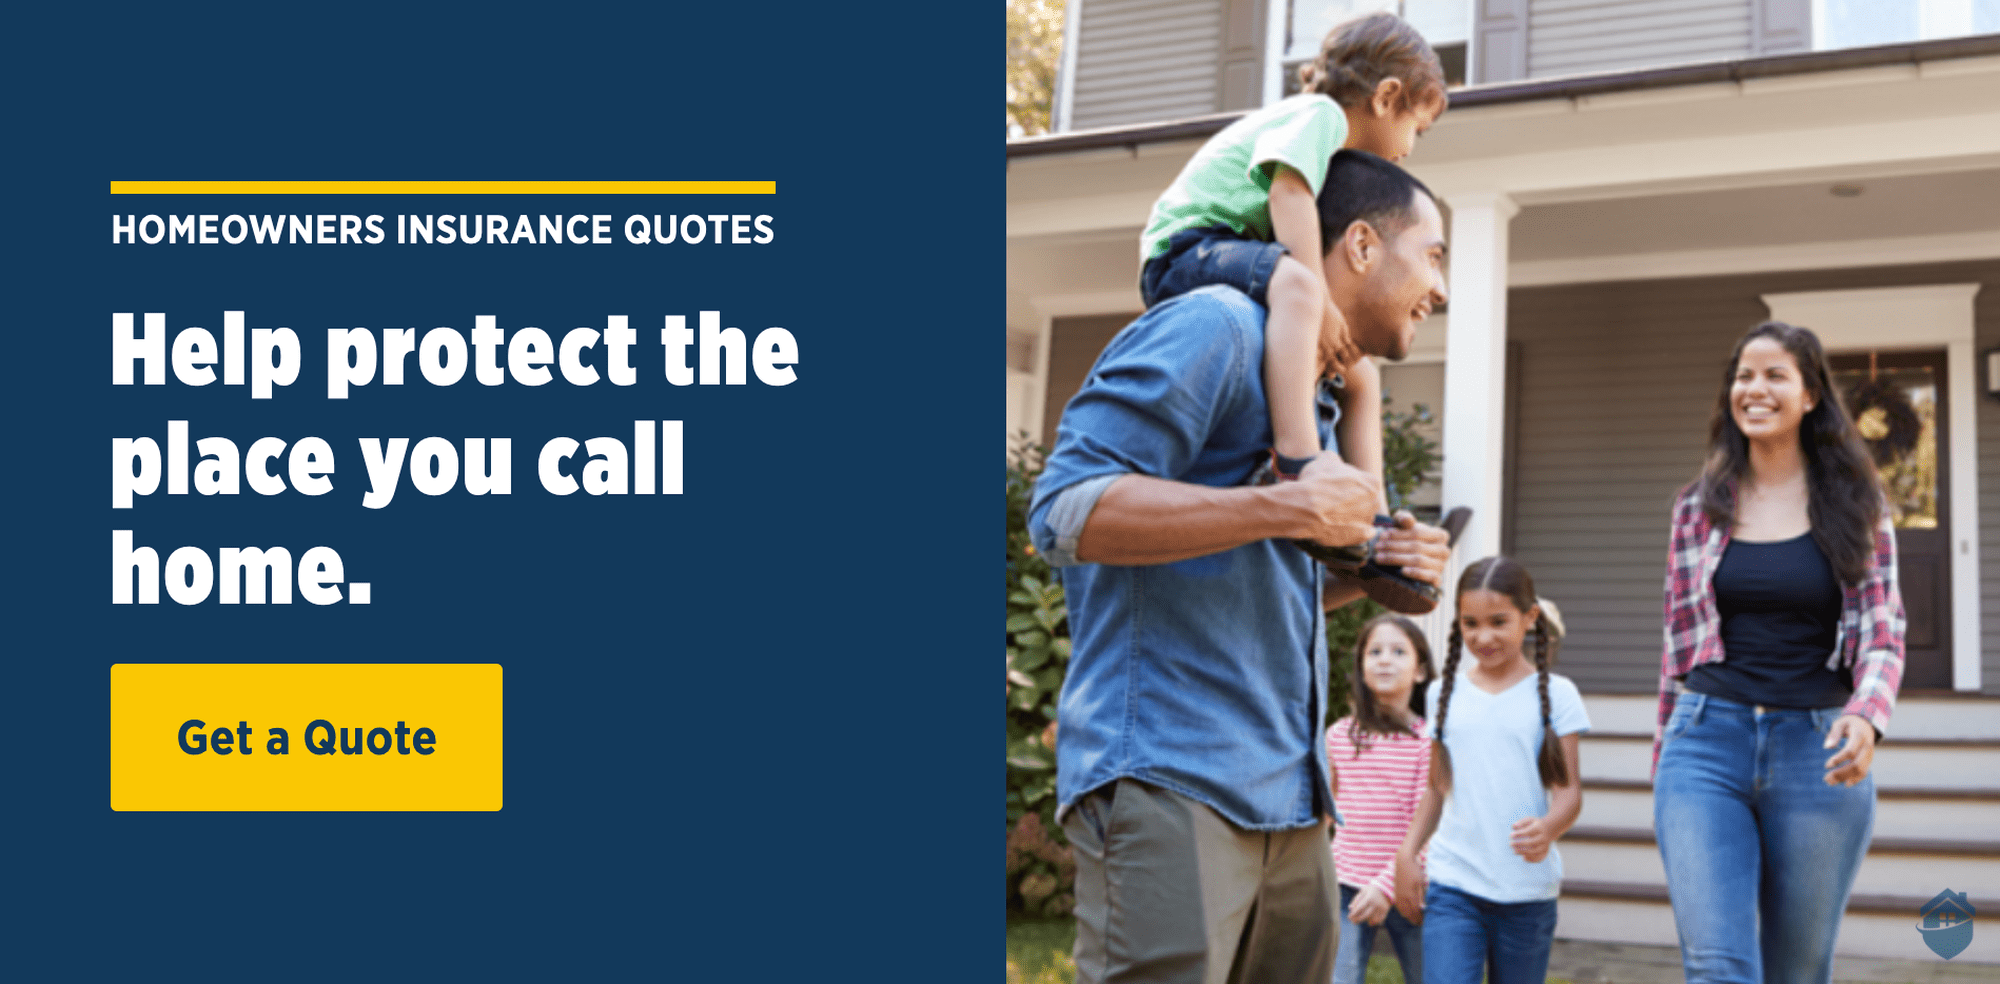 USAA homeowners insurance offers quality protection for service members.